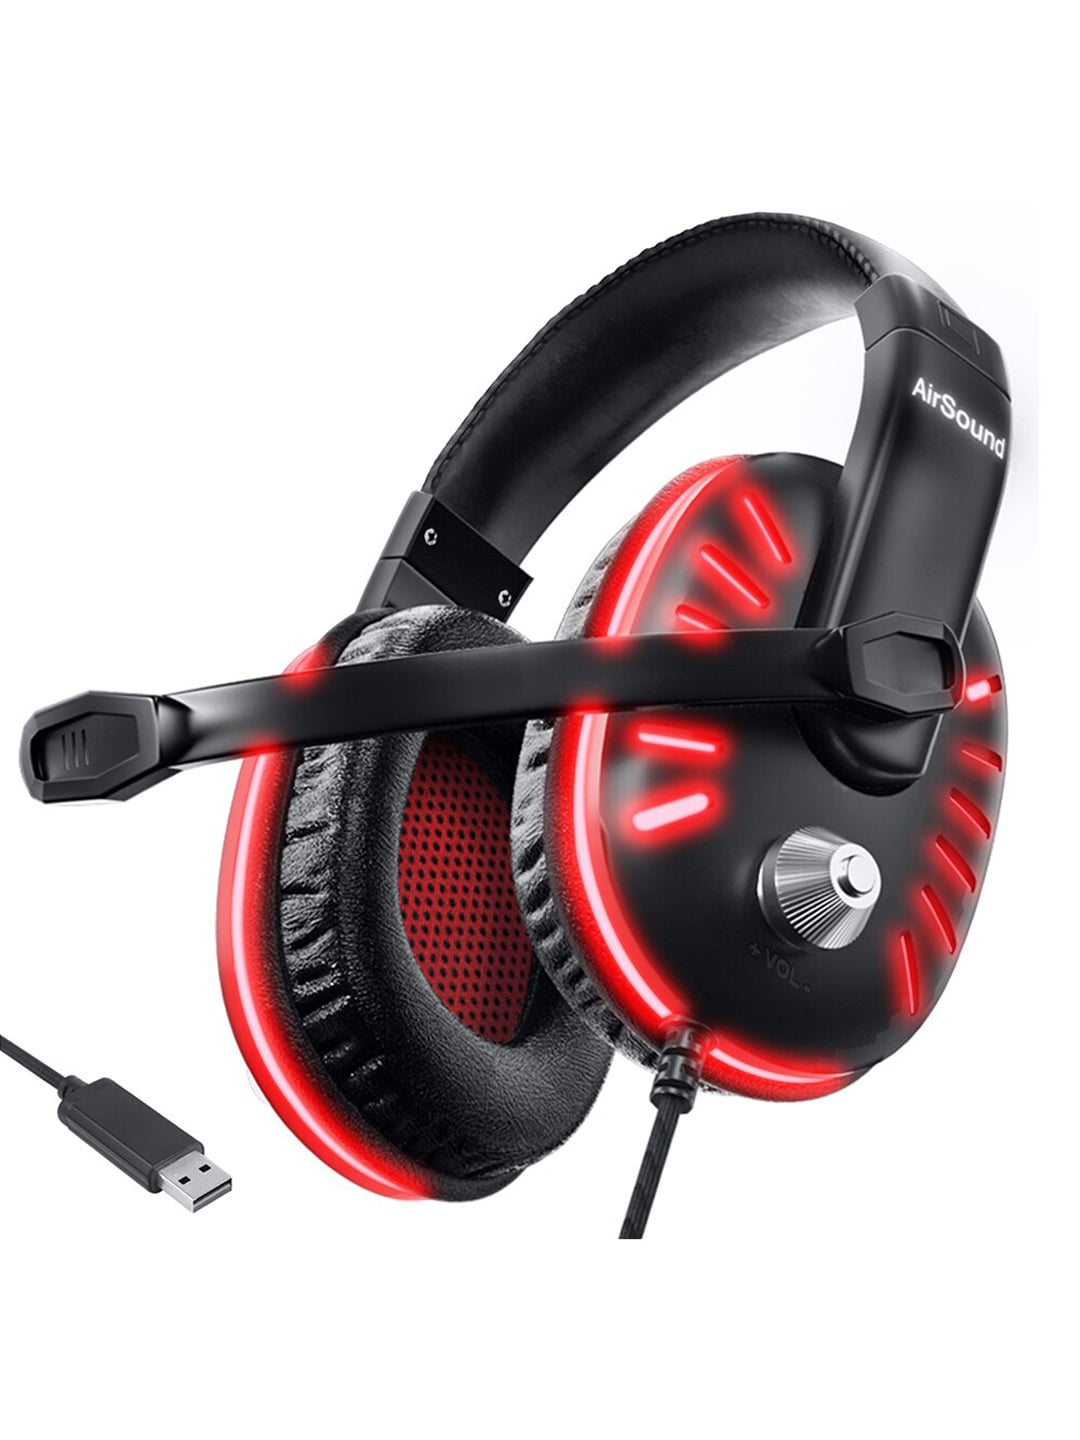 AirSound Unisex Blackwith Red LED light Wired Over Ear Headphone with Mic Price in India